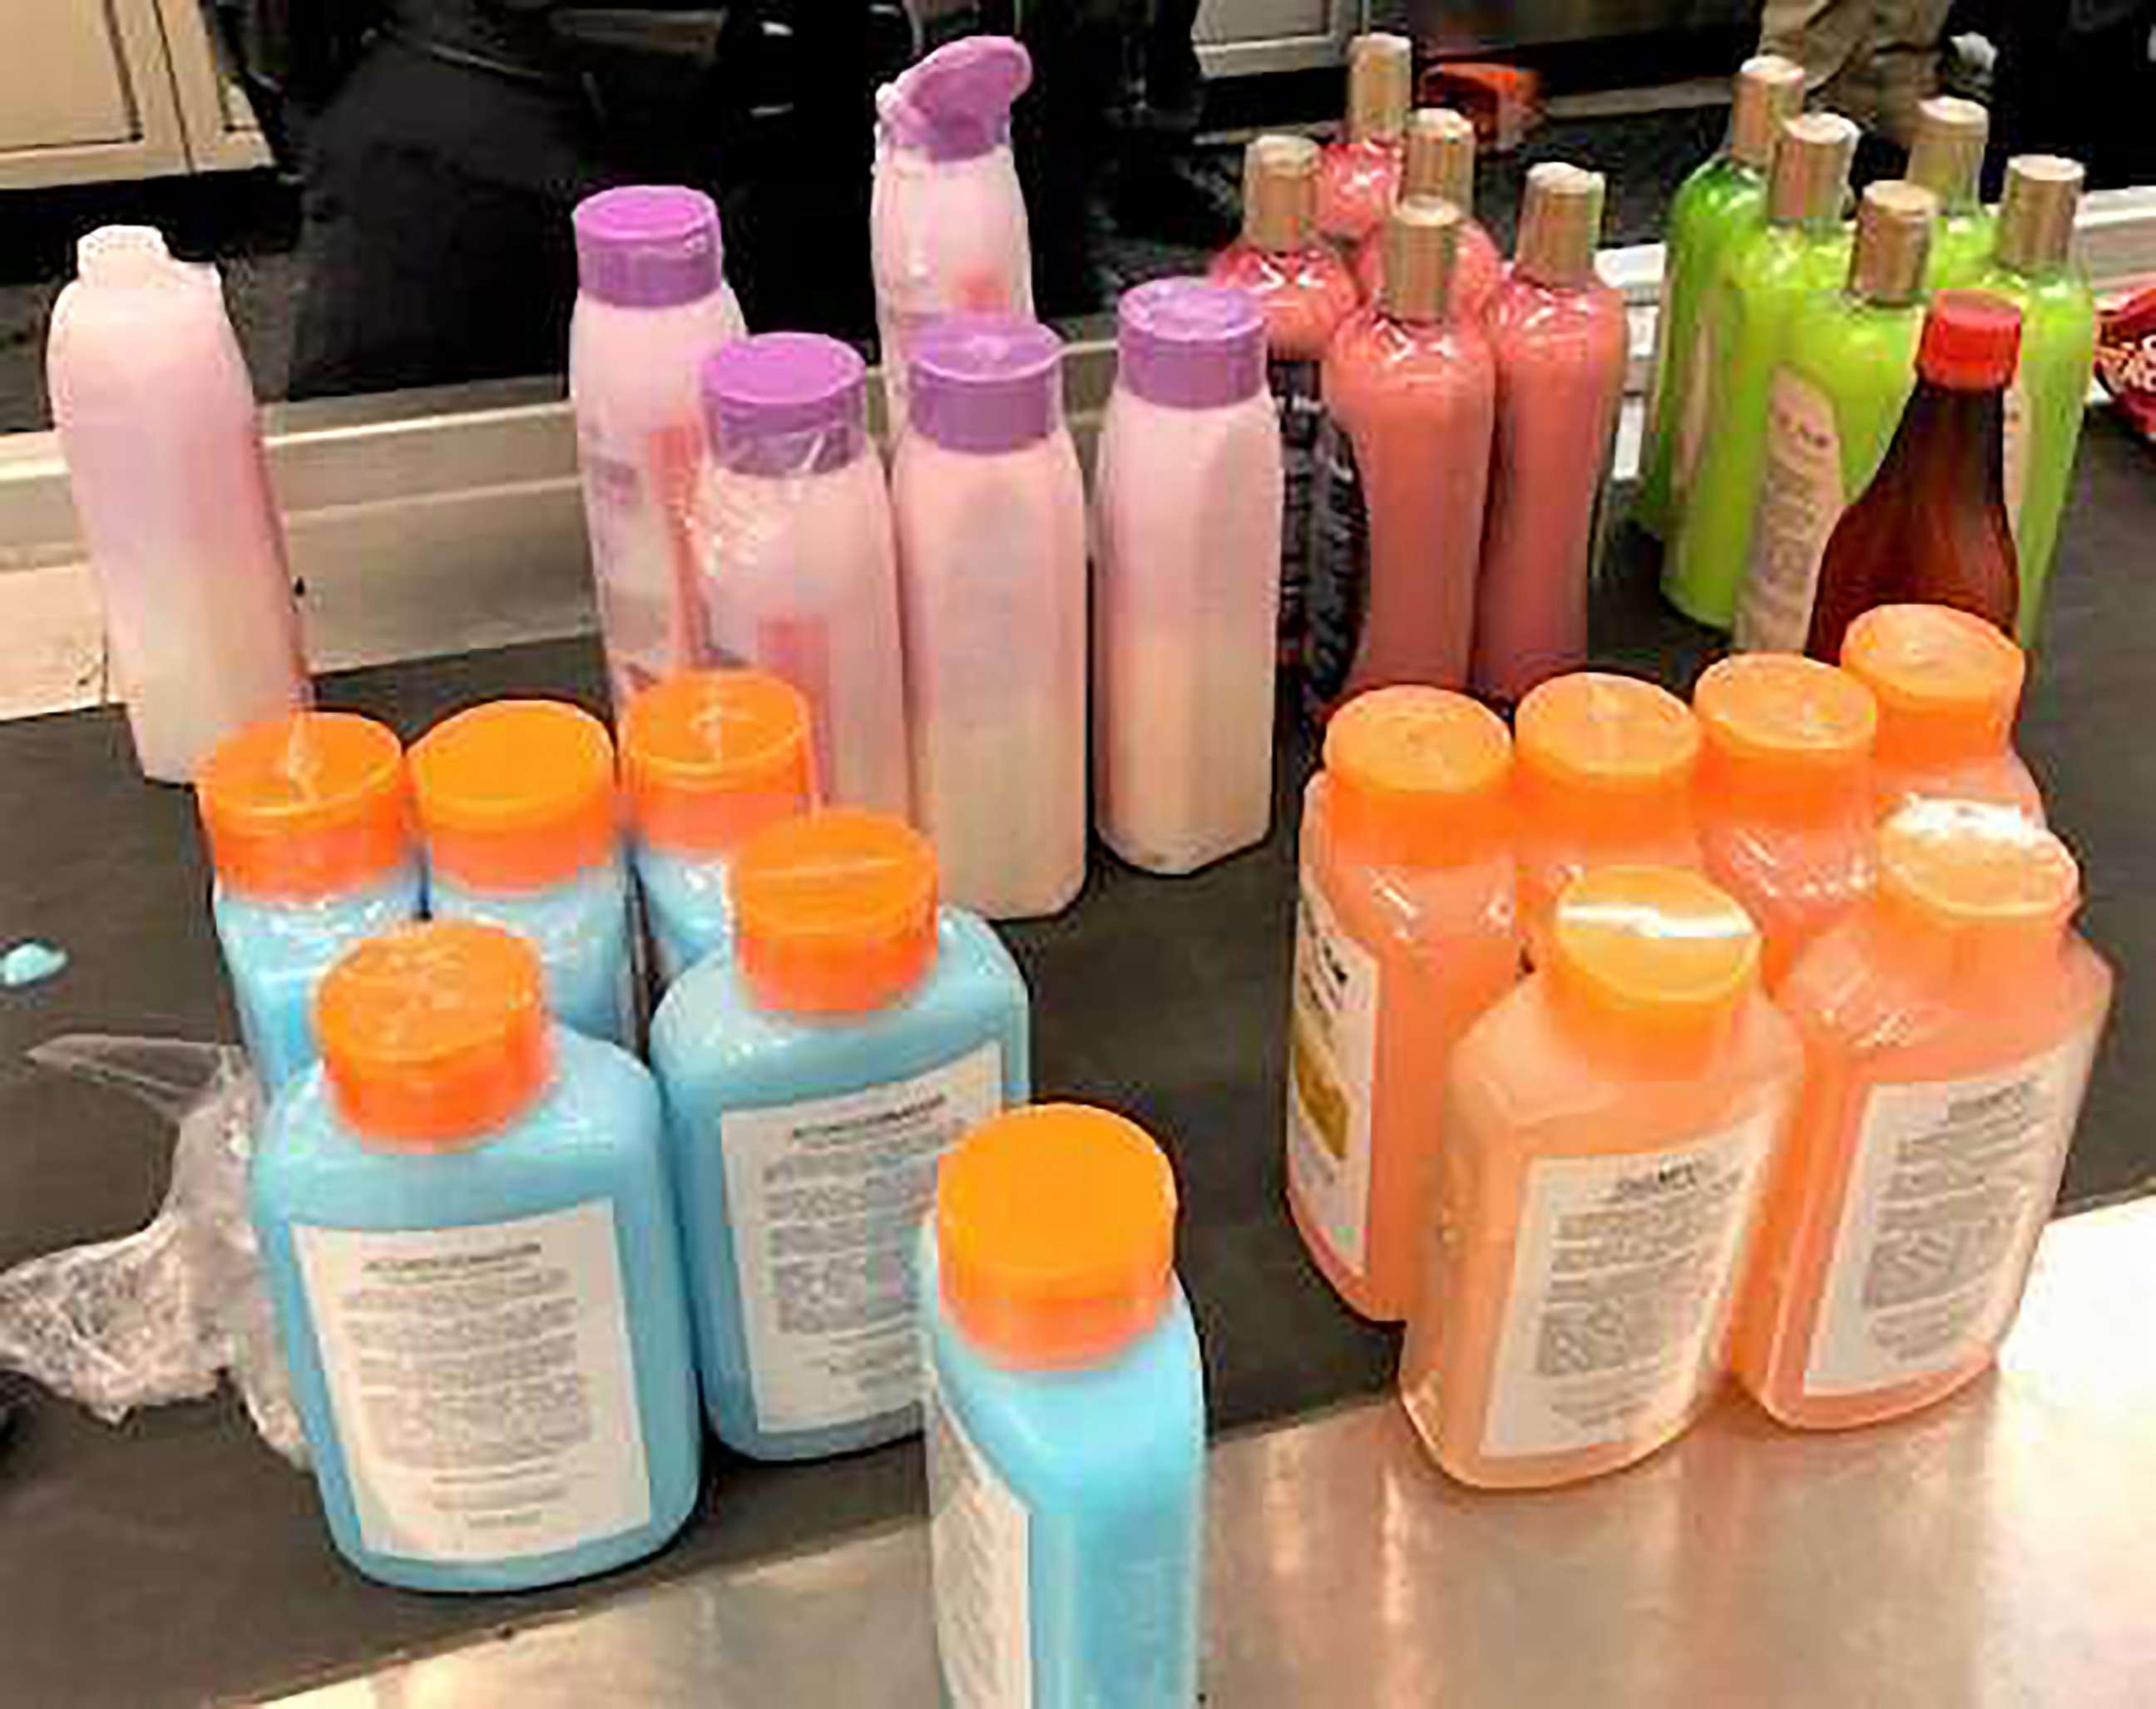 PHOTO: U.S. Customs and Border Protection officers working at the George Bush Intercontinental Airport intercepted a traveler attempting to smuggle 35 pounds of liquid cocaine into the United States in shampoo bottles, Nov. 11, 2019. 